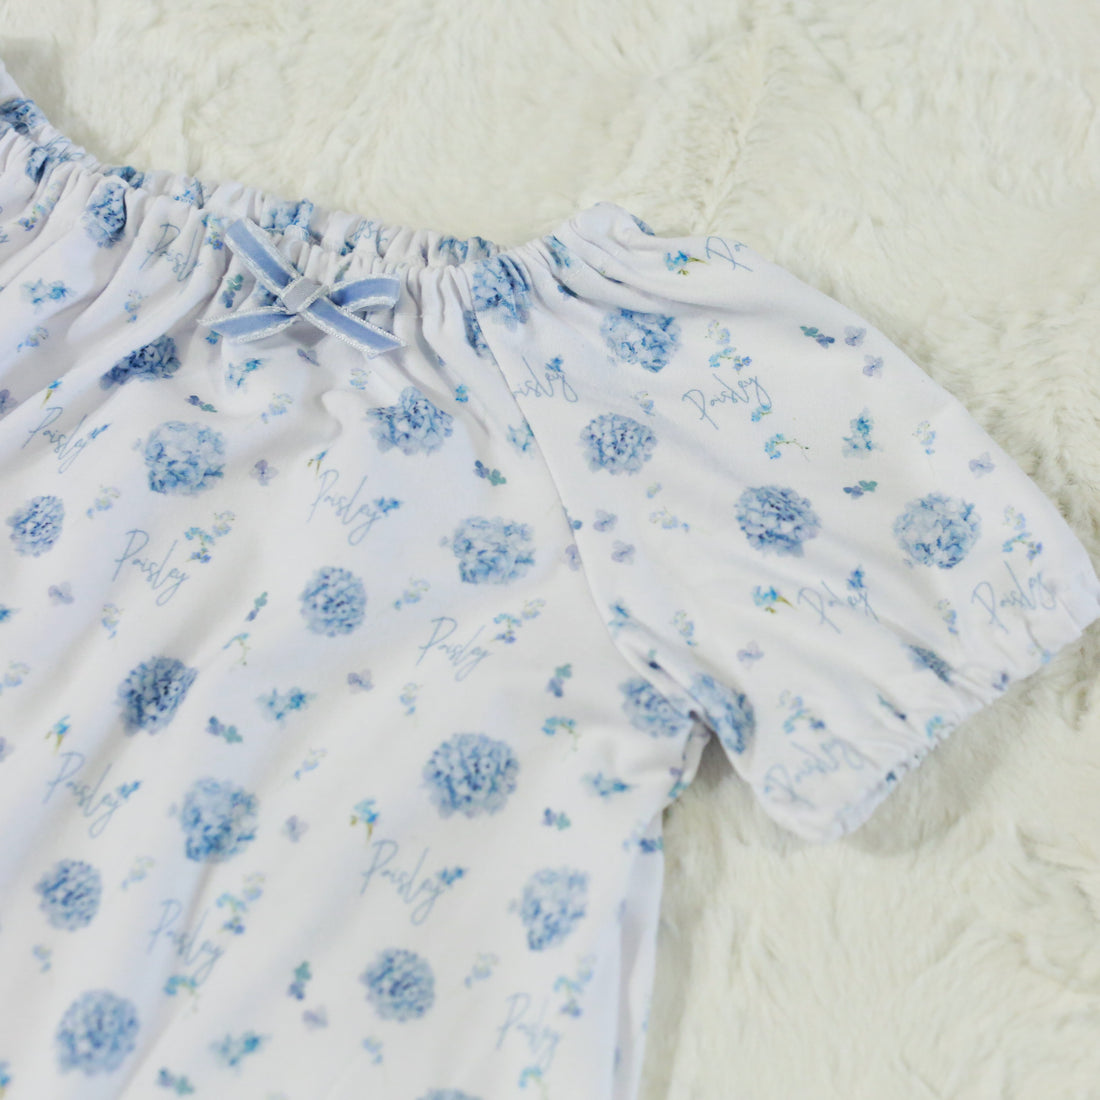 Mary's Blue Floral Kid's Nightgown  (12 months to kids 14)